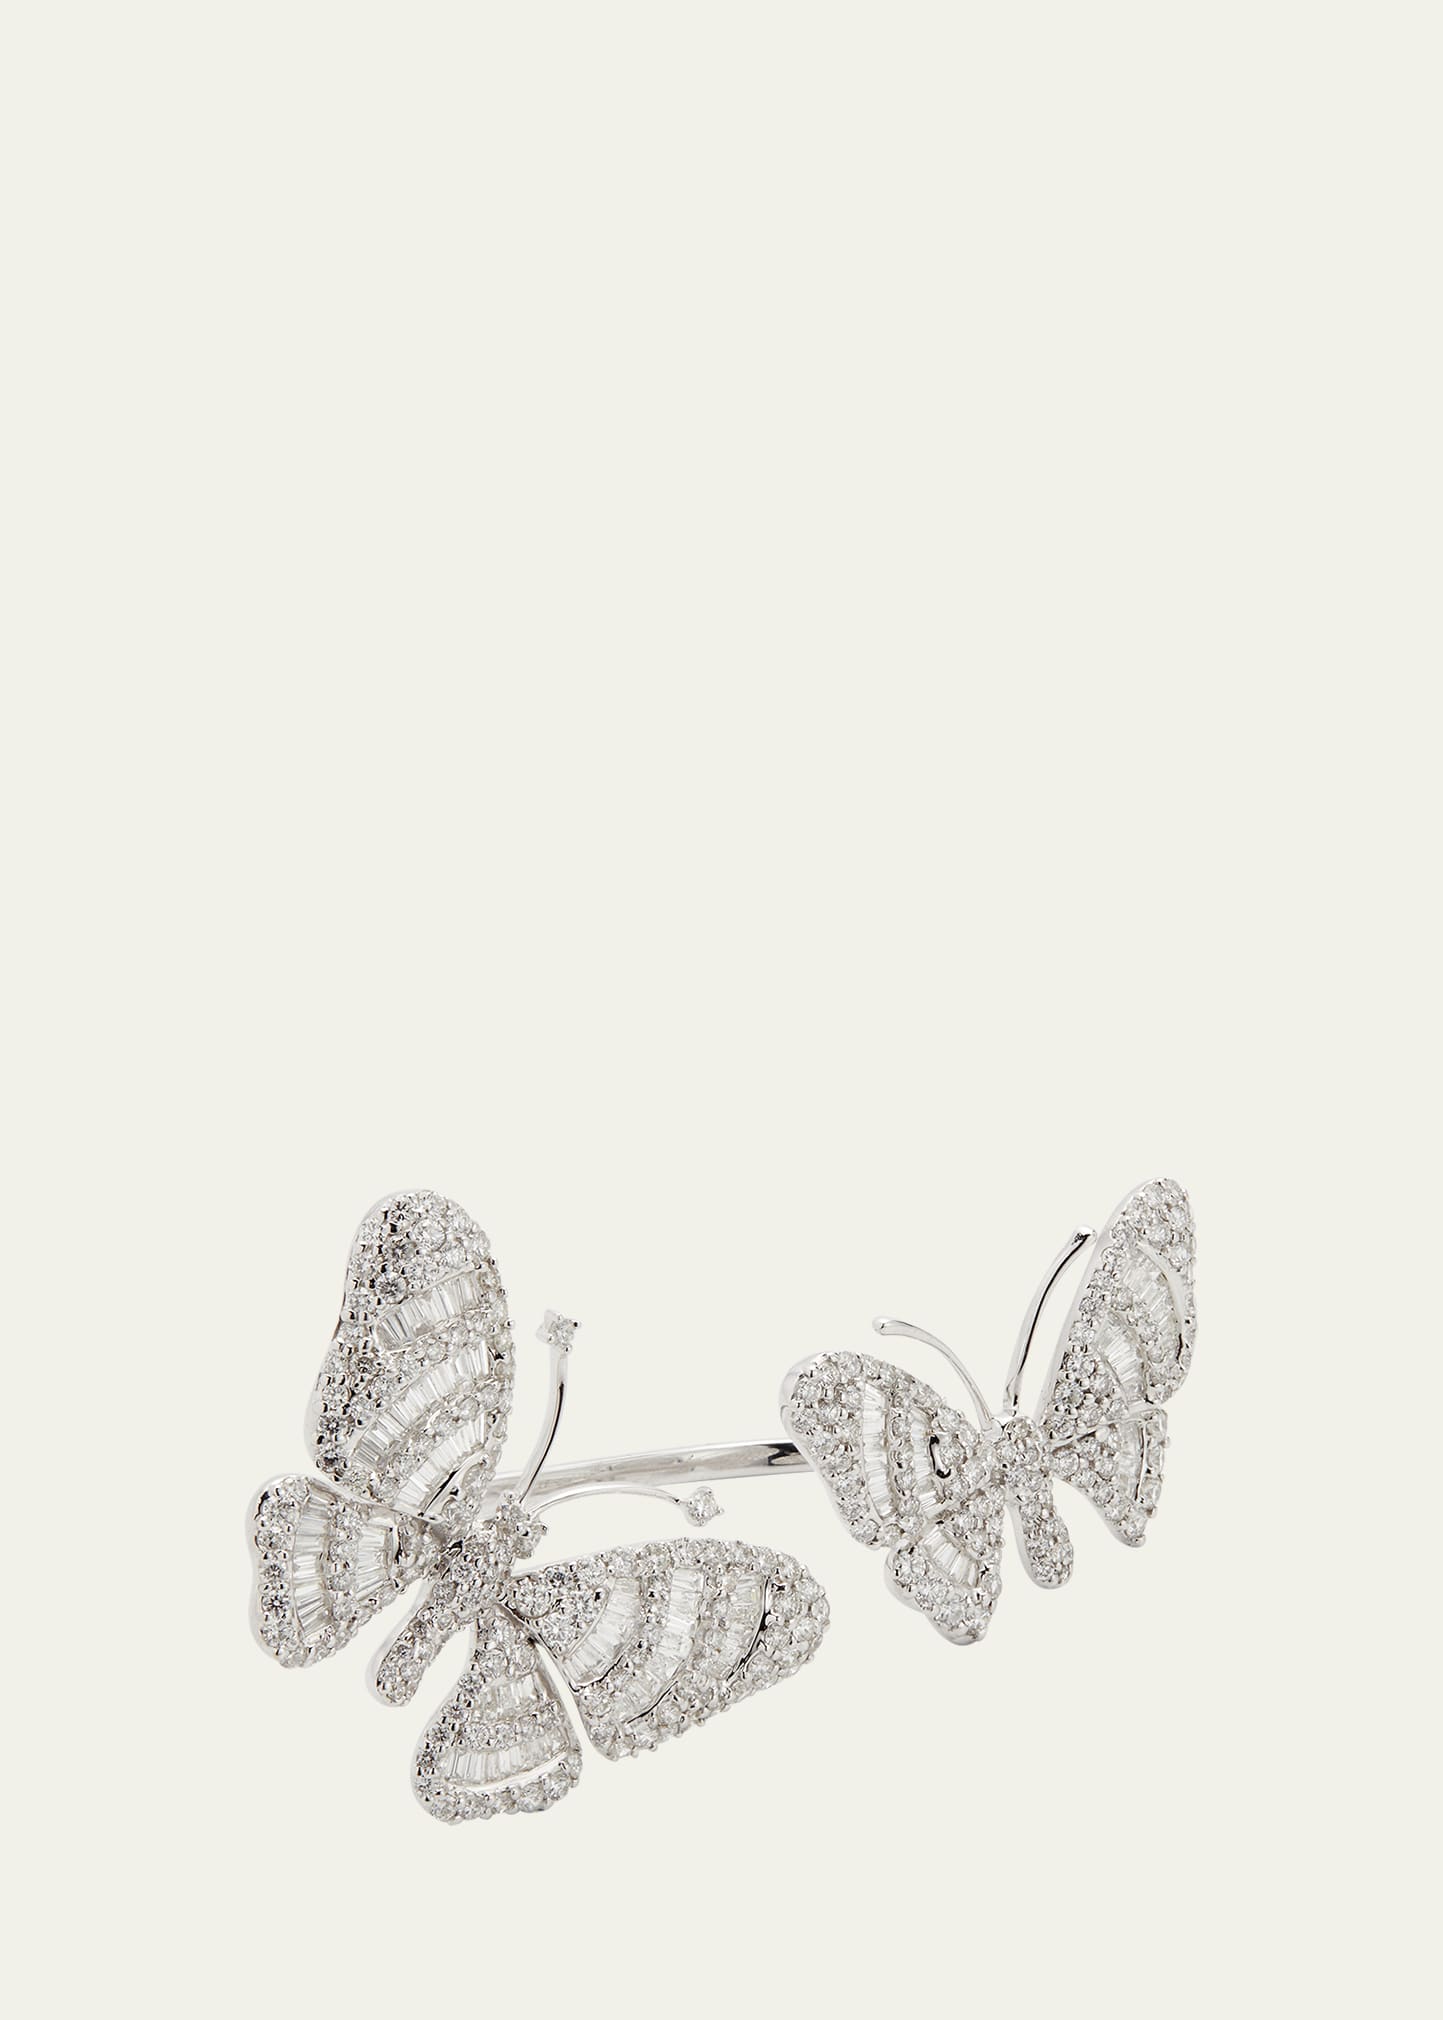 Butterfly Collection Diamond Ring in White Gold